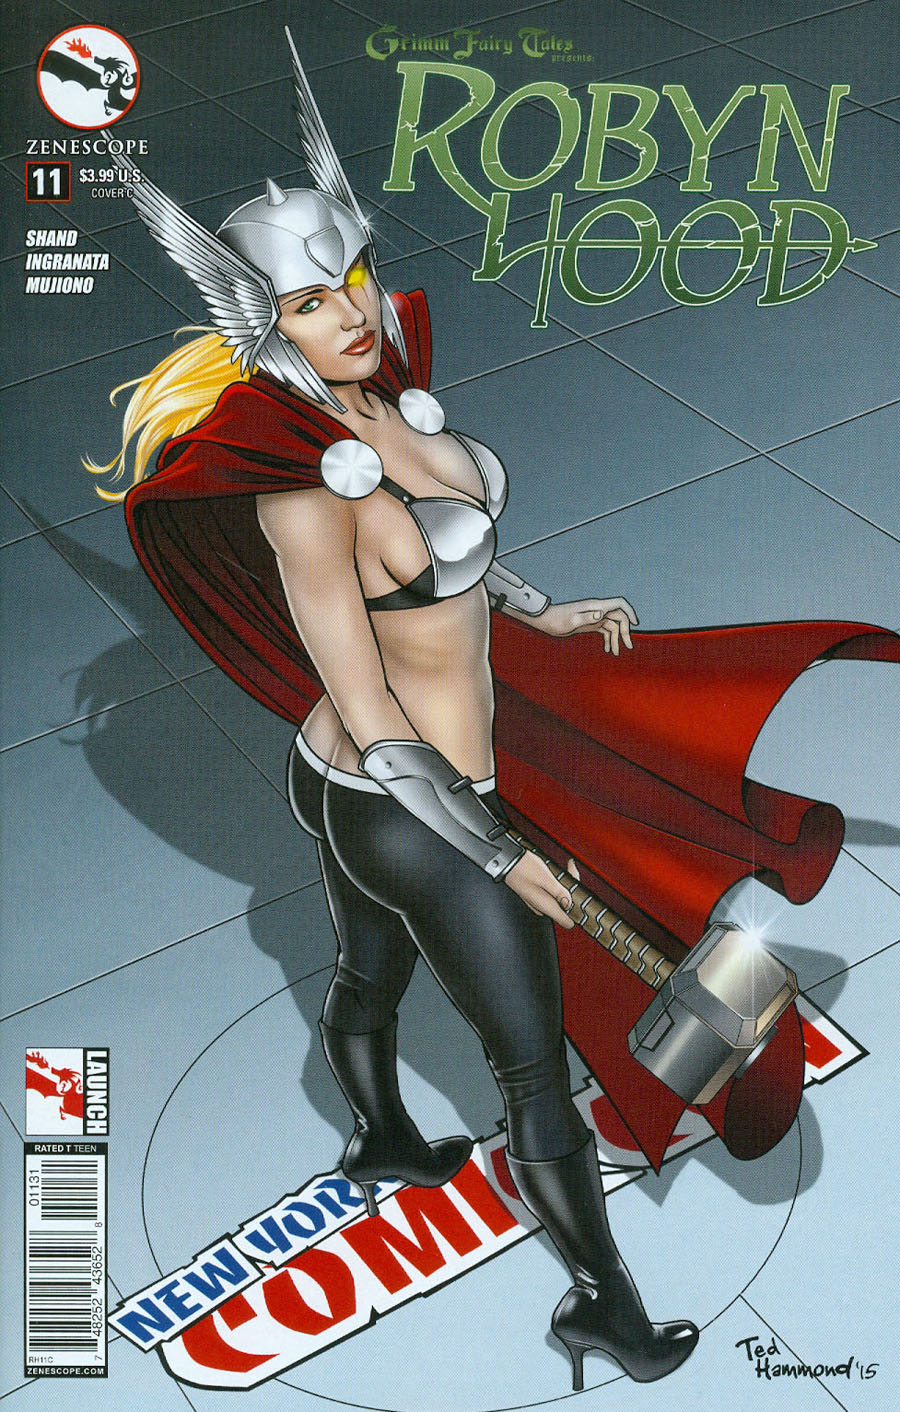 Grimm Fairy Tales Presents Robyn Hood Vol 2 #11 Cover C Ted Hammond